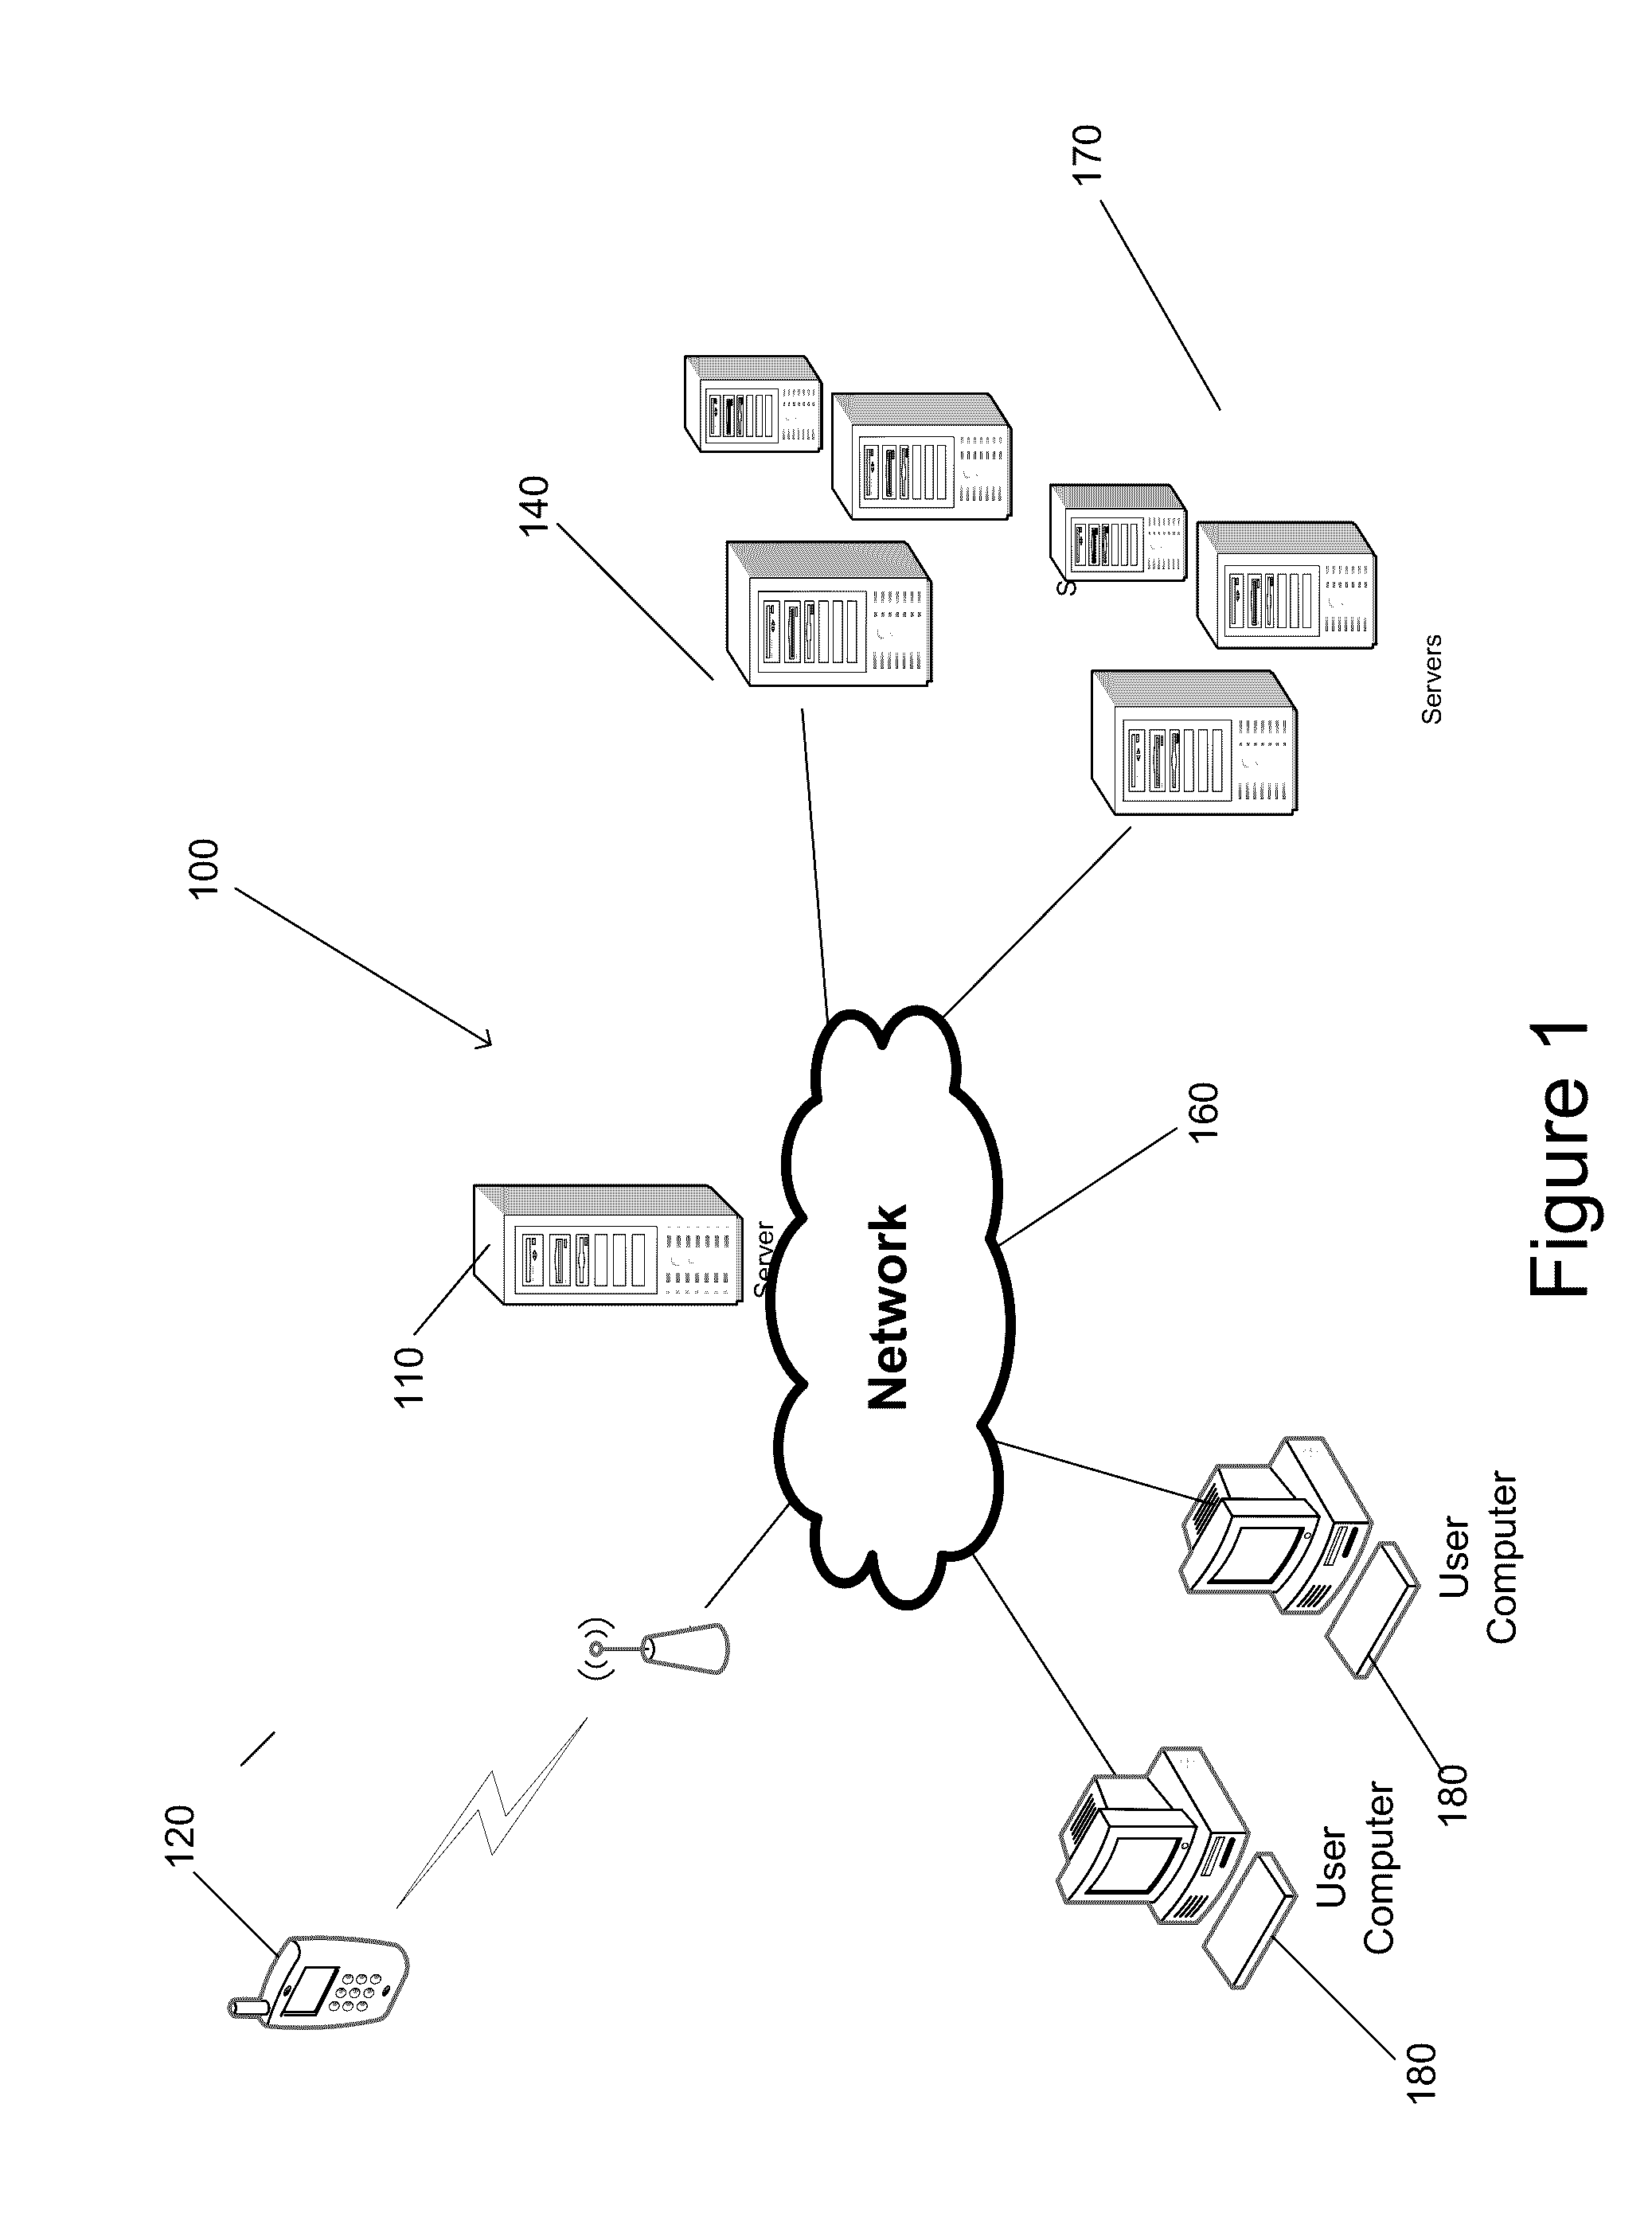 Systems and Methods for Providing Reinforcement Learning in a Deep Learning System